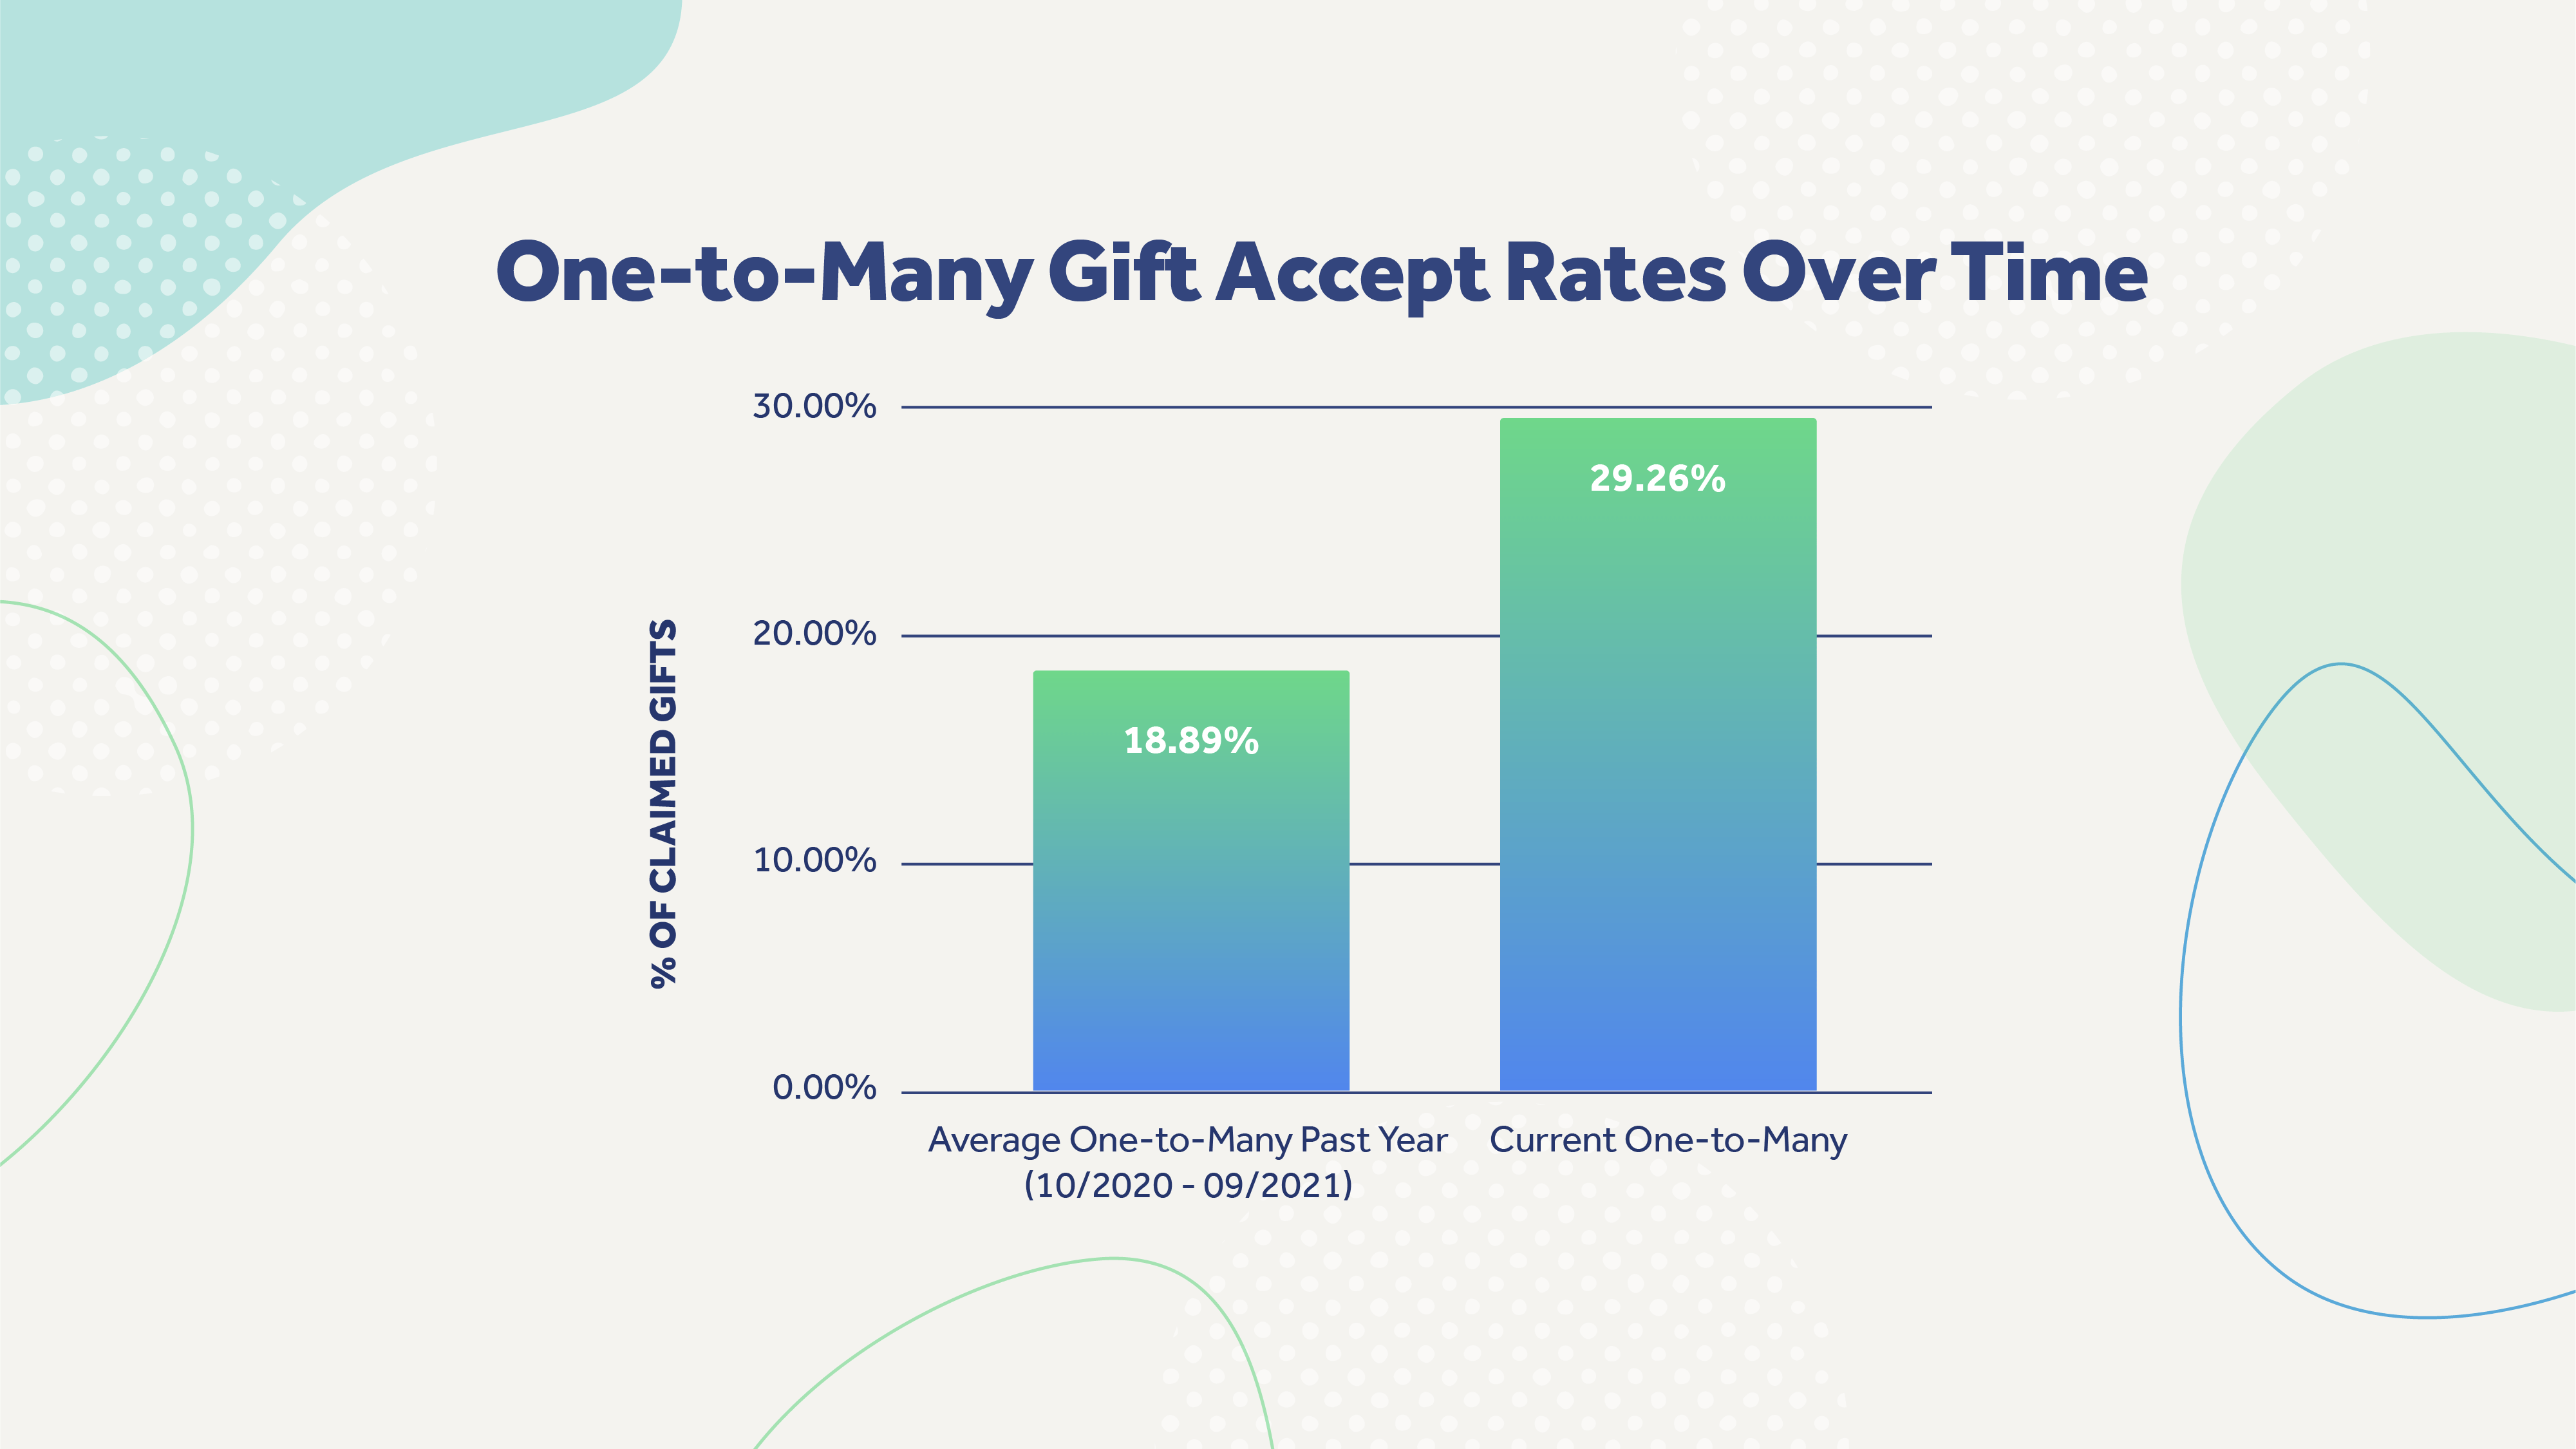 Chart showing one-to-many gift acceptance rates over time